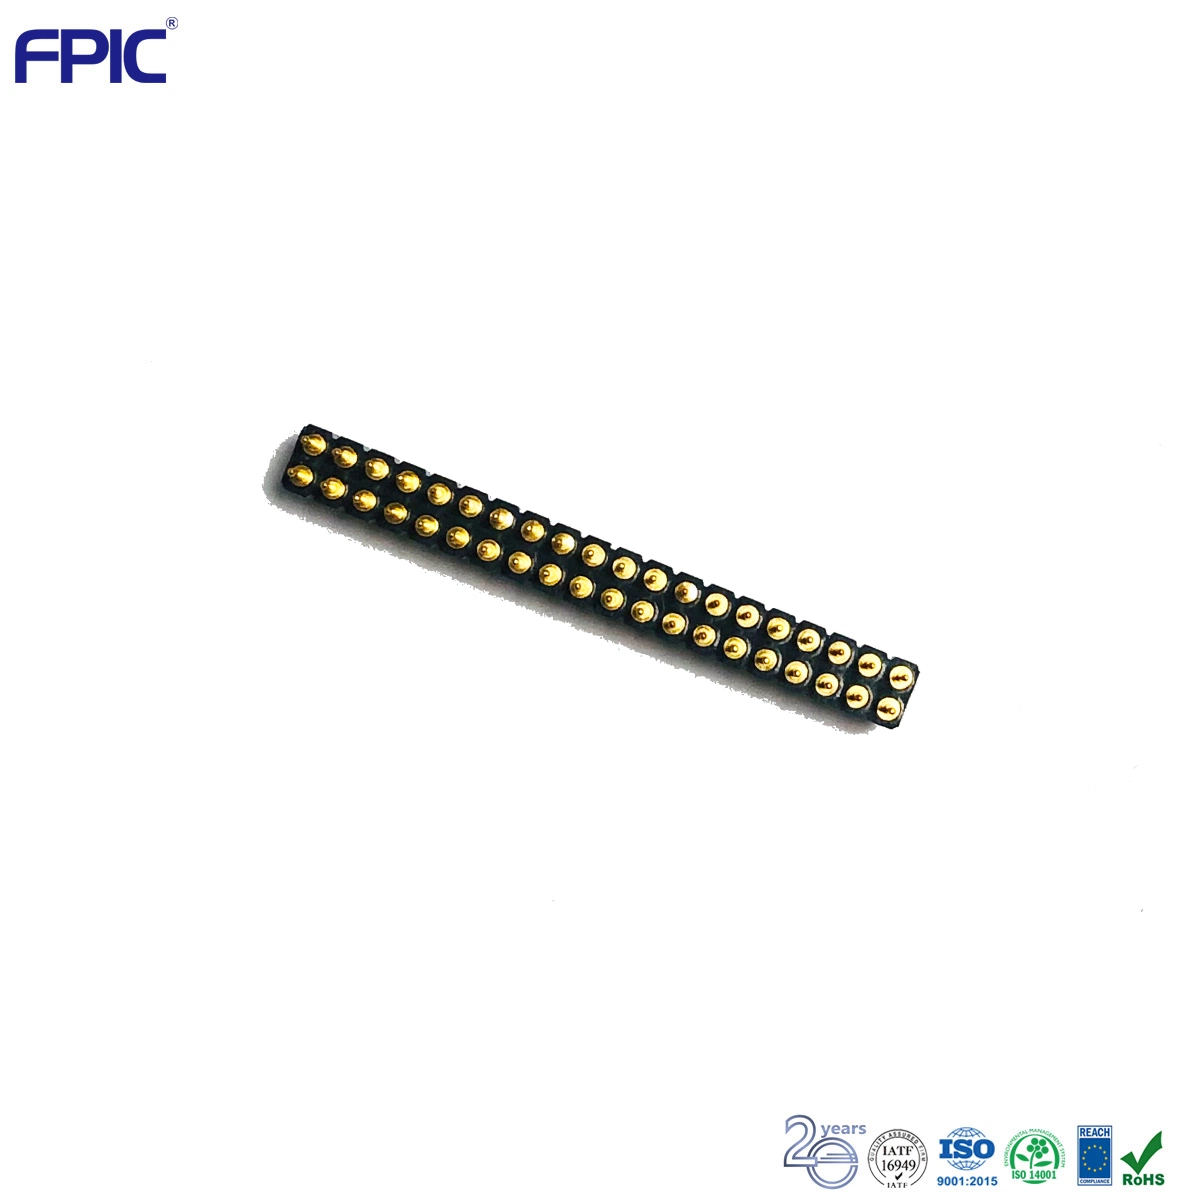 Fpic Electronic PCB Pin Header Terminal Block Board to Board Connector Component